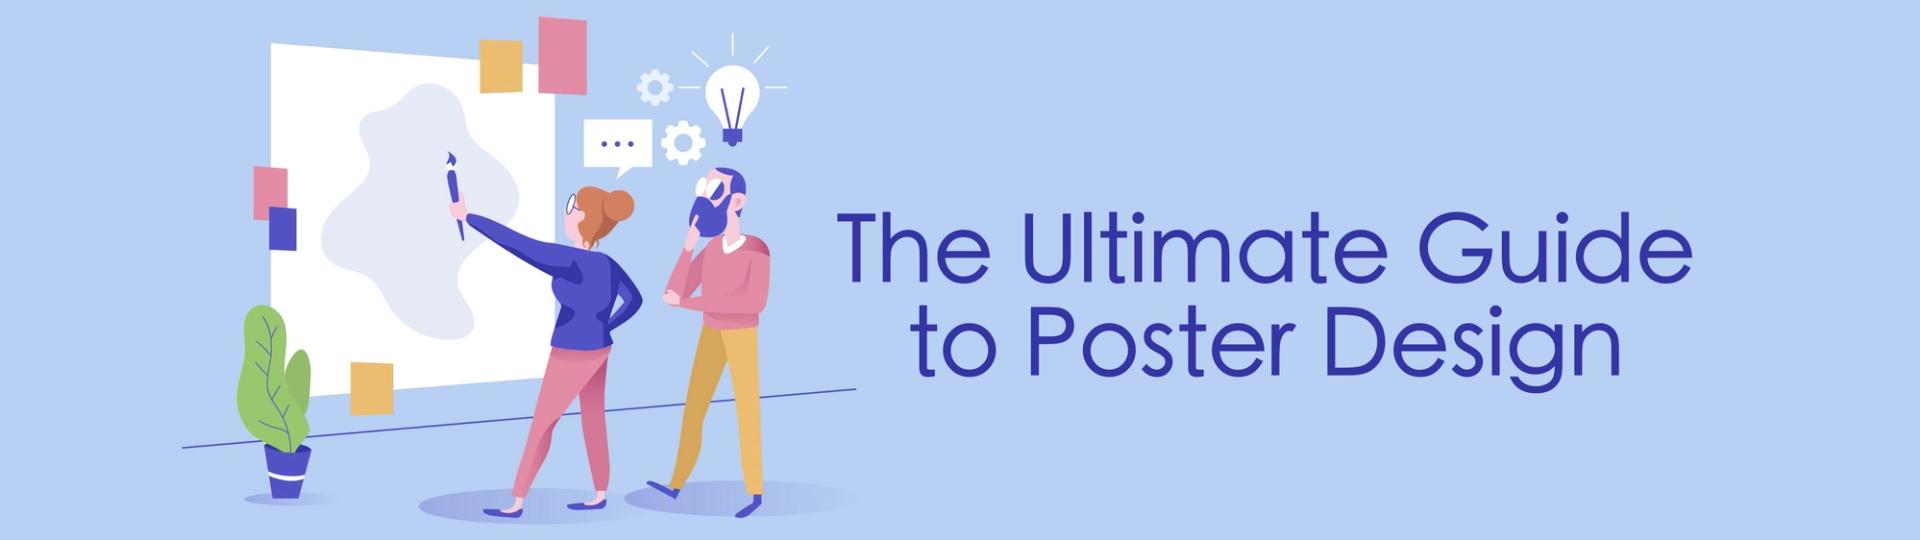 The Ultimate Guide to Poster Design - Superside